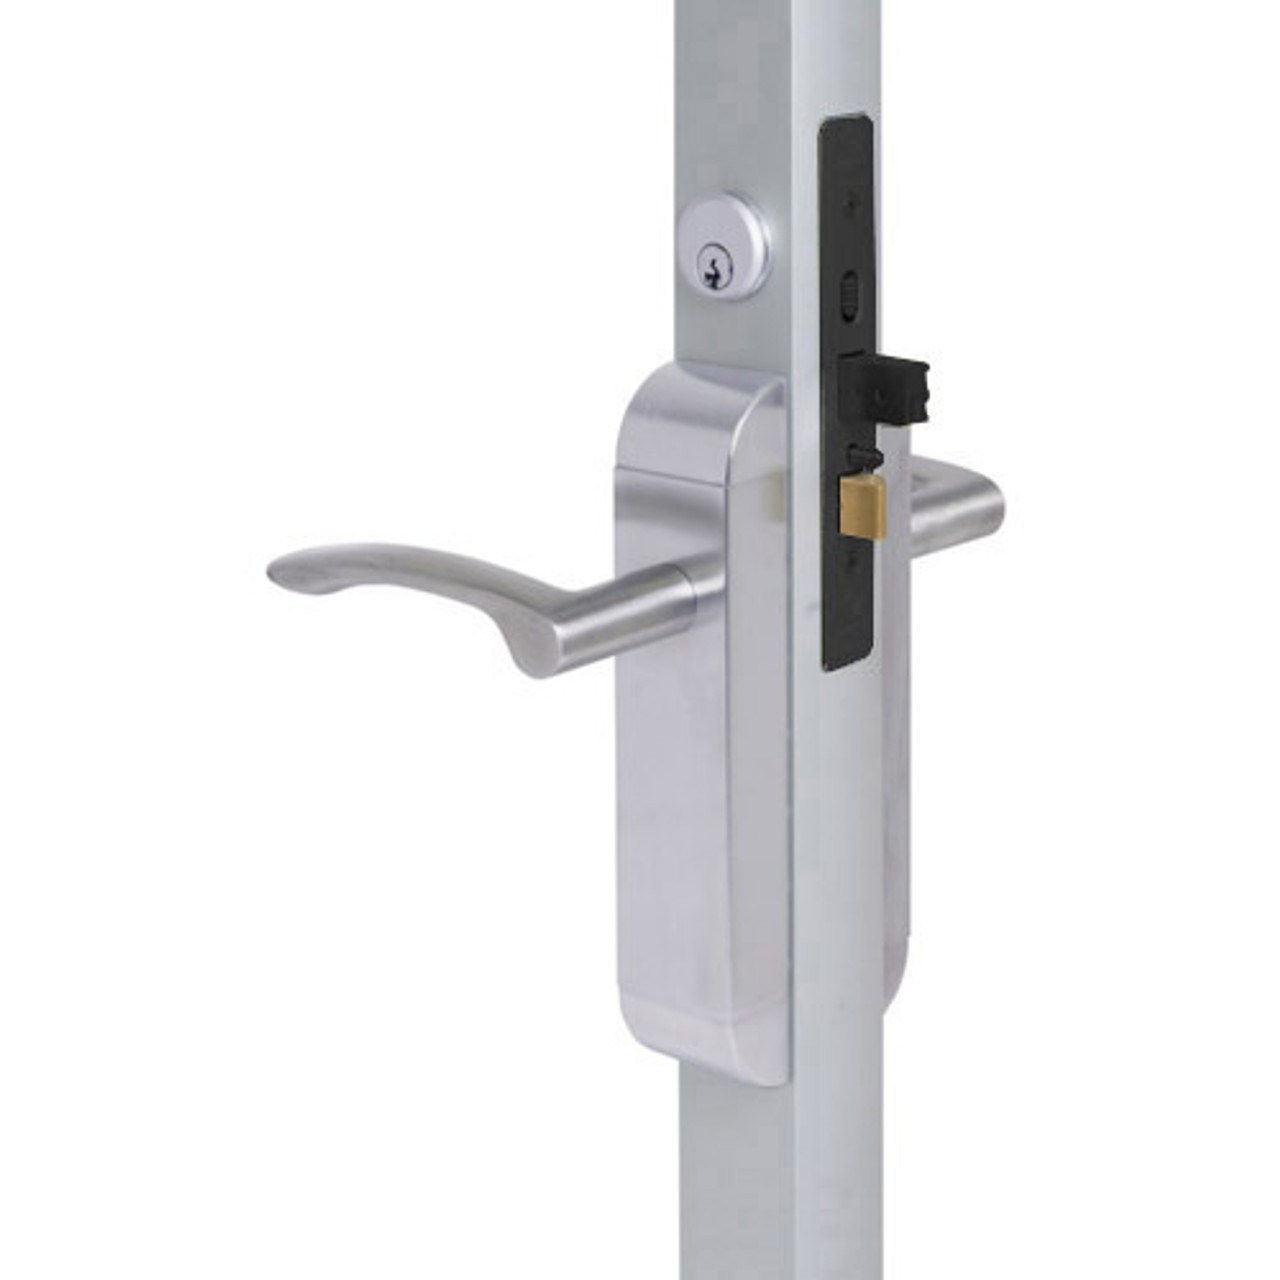 2190-323-102-32 Adams Rite Dual Force Interconnected 2190 series Deadlock/Deadlatch in Bright Stainless